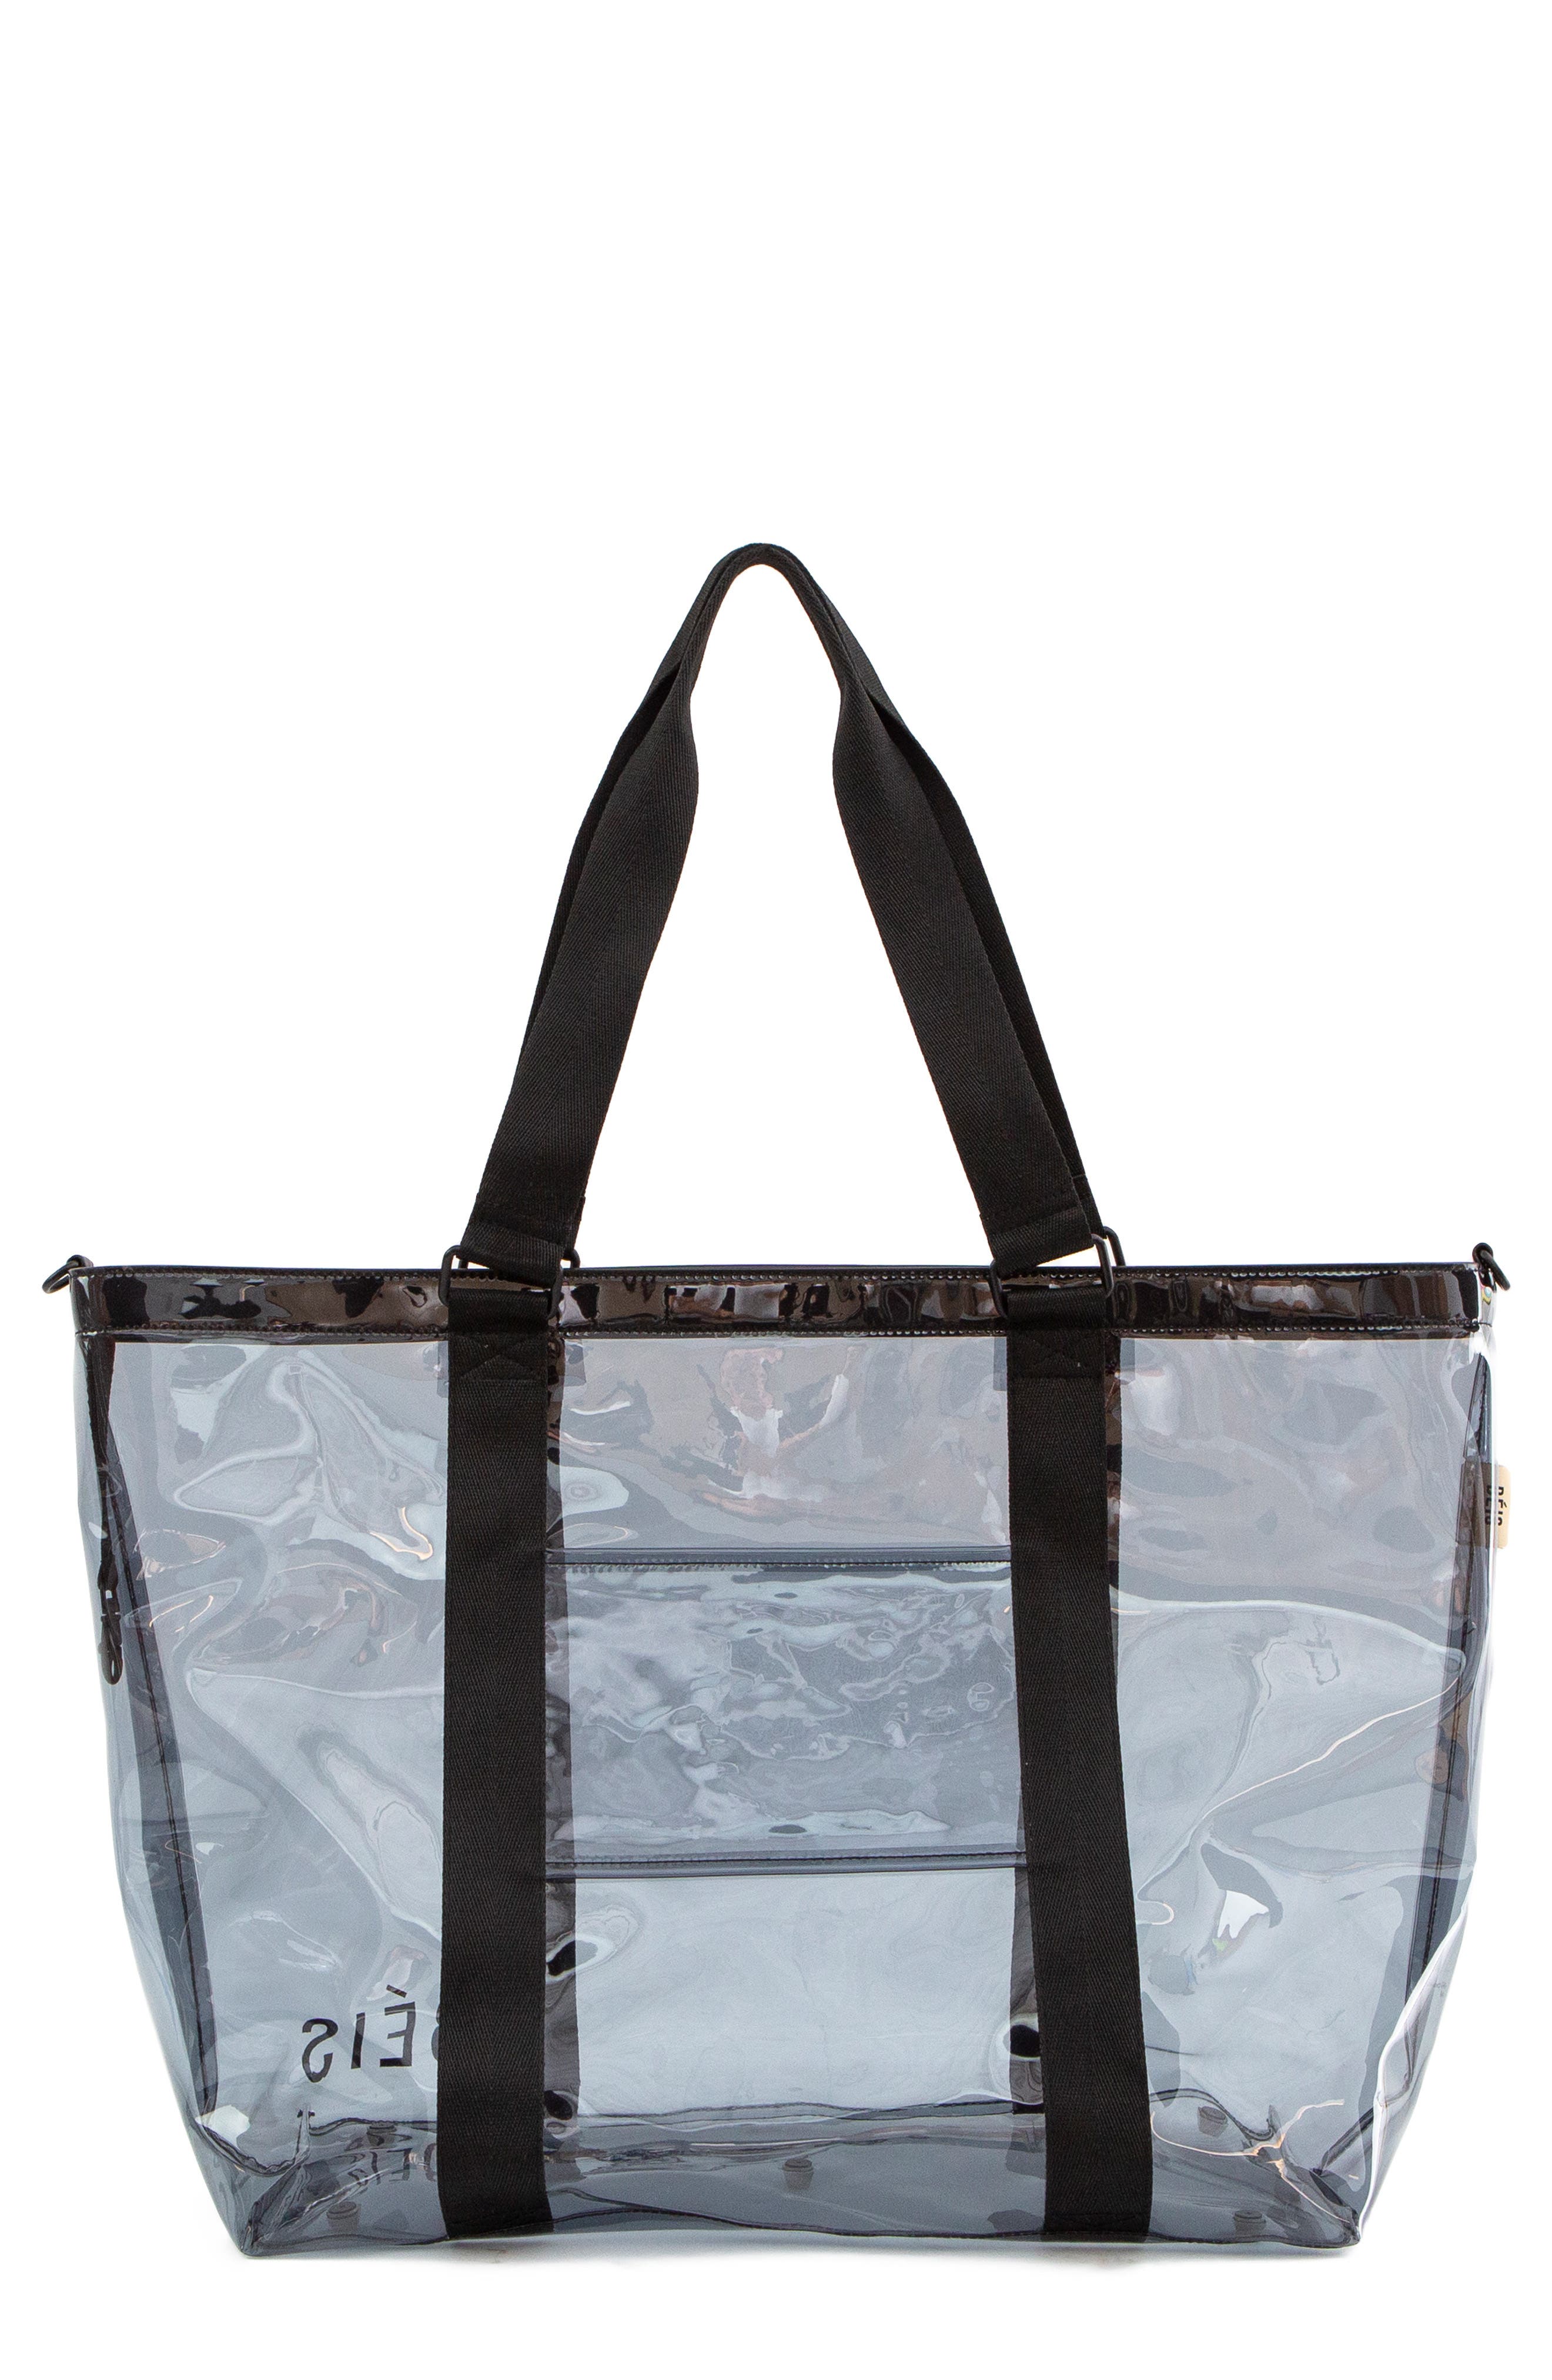 clear beach bags and totes